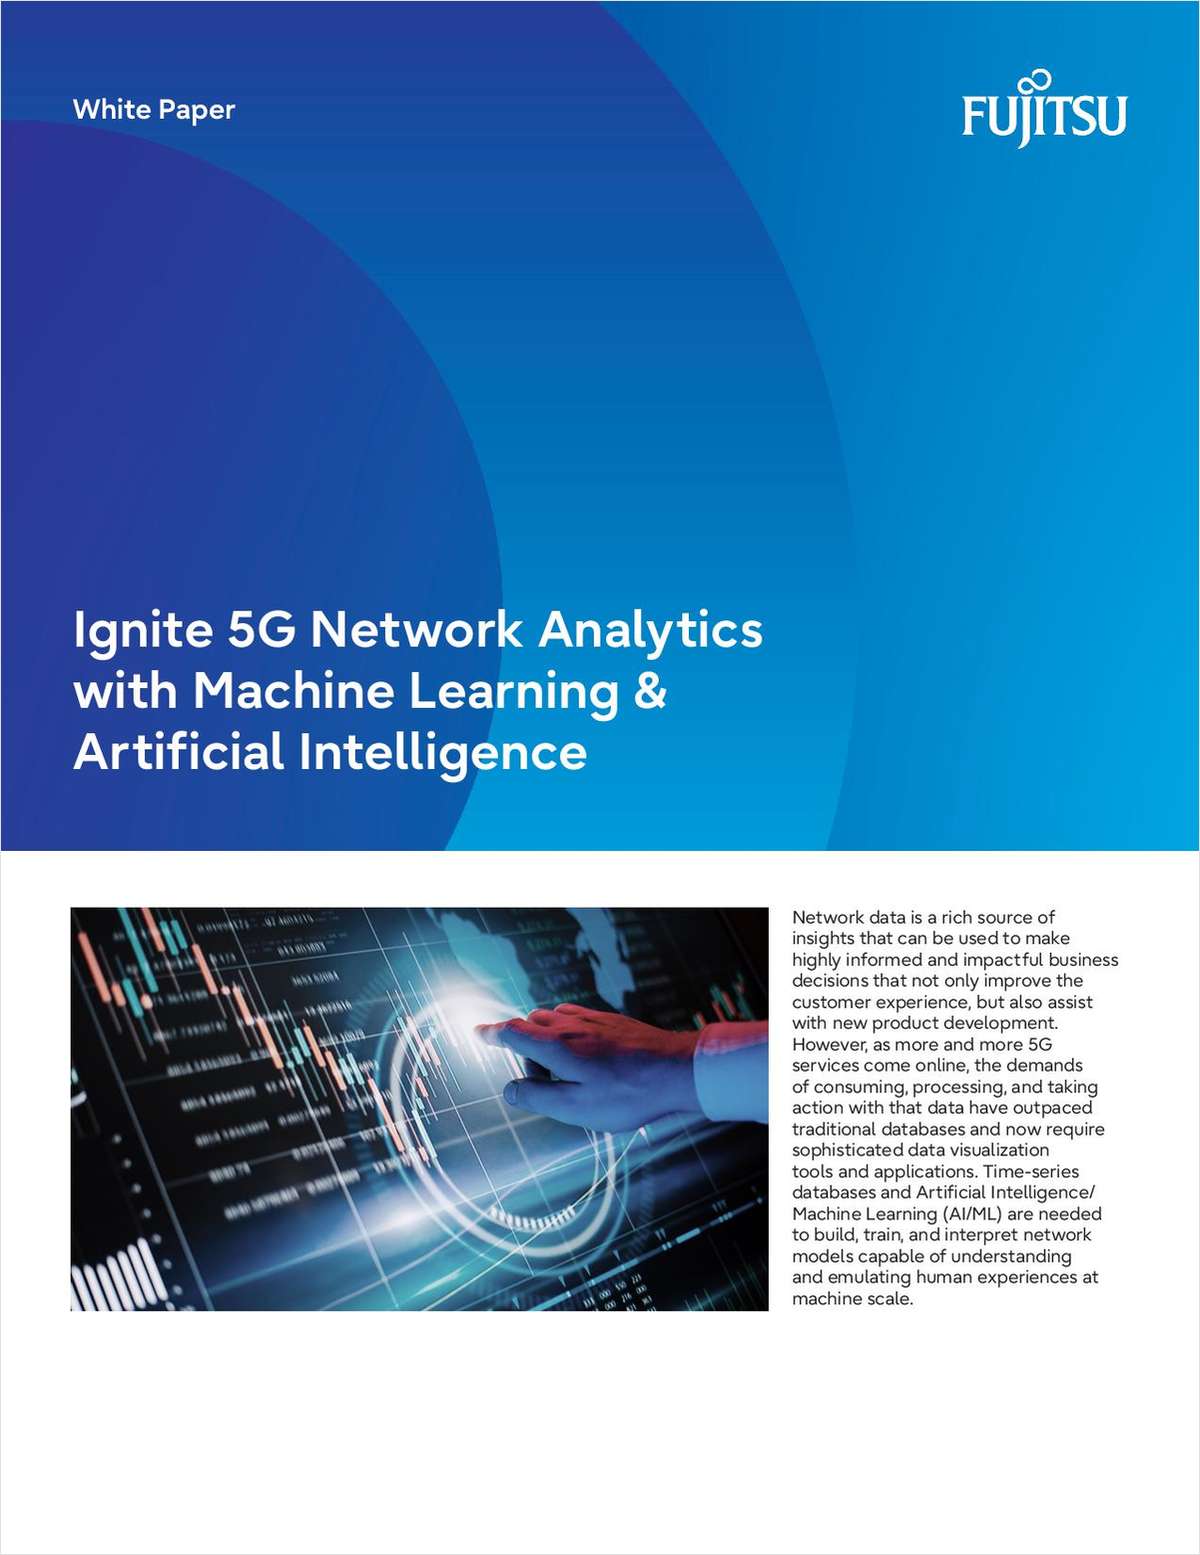 Ignite 5G analytics with machine learning and artifical intelligence